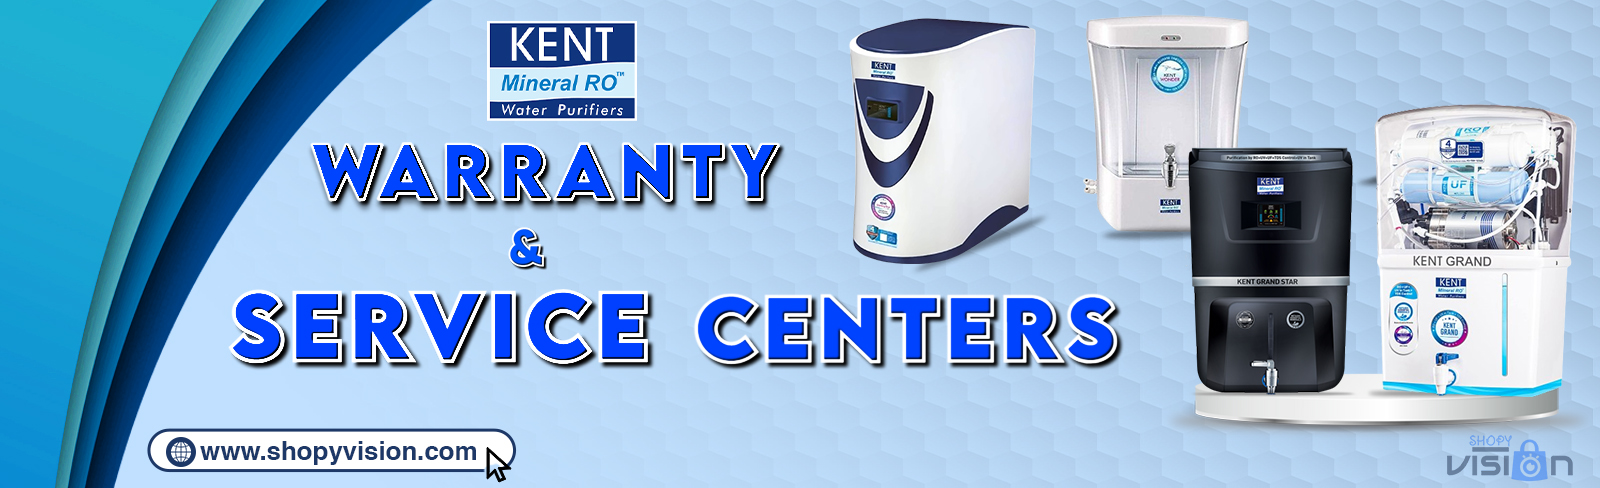 Kent ro Warranty & Service Center in India Mobile Banner